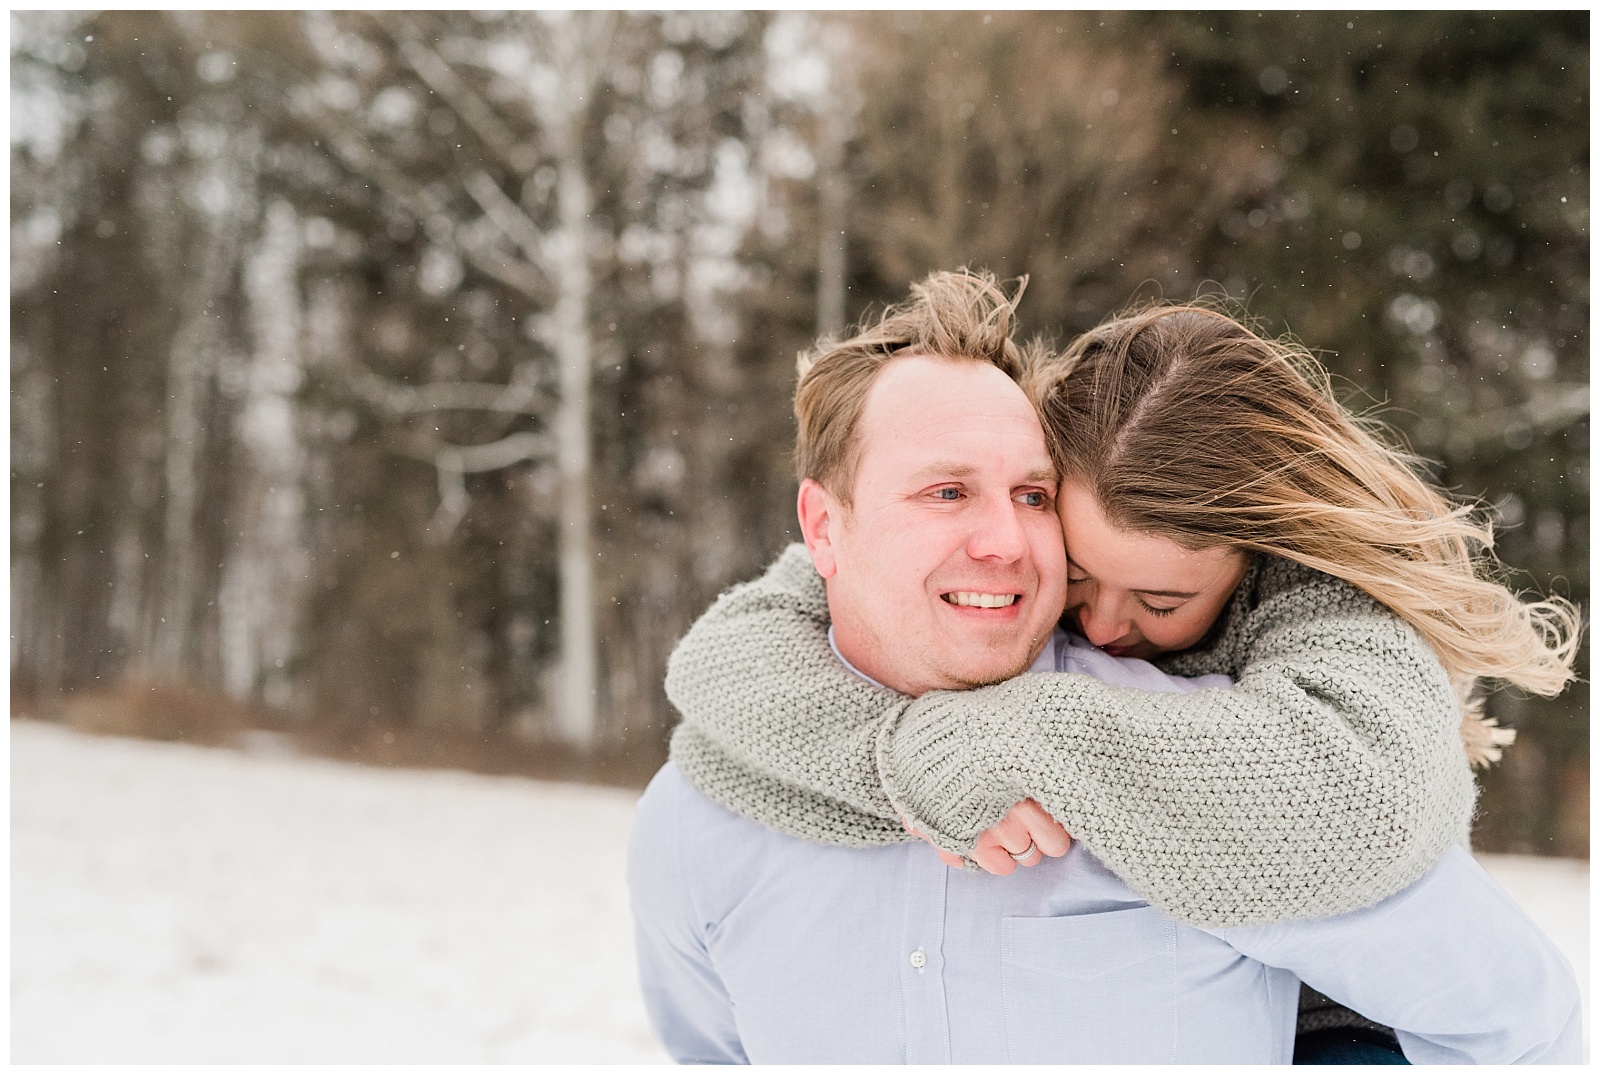 New Jersey Engagement Session, Snowy, Winter, Cozy, Session, Wedding Photographer, Cross Estate Gardens, Snow, Wintry, Light and Airy, Snuggle